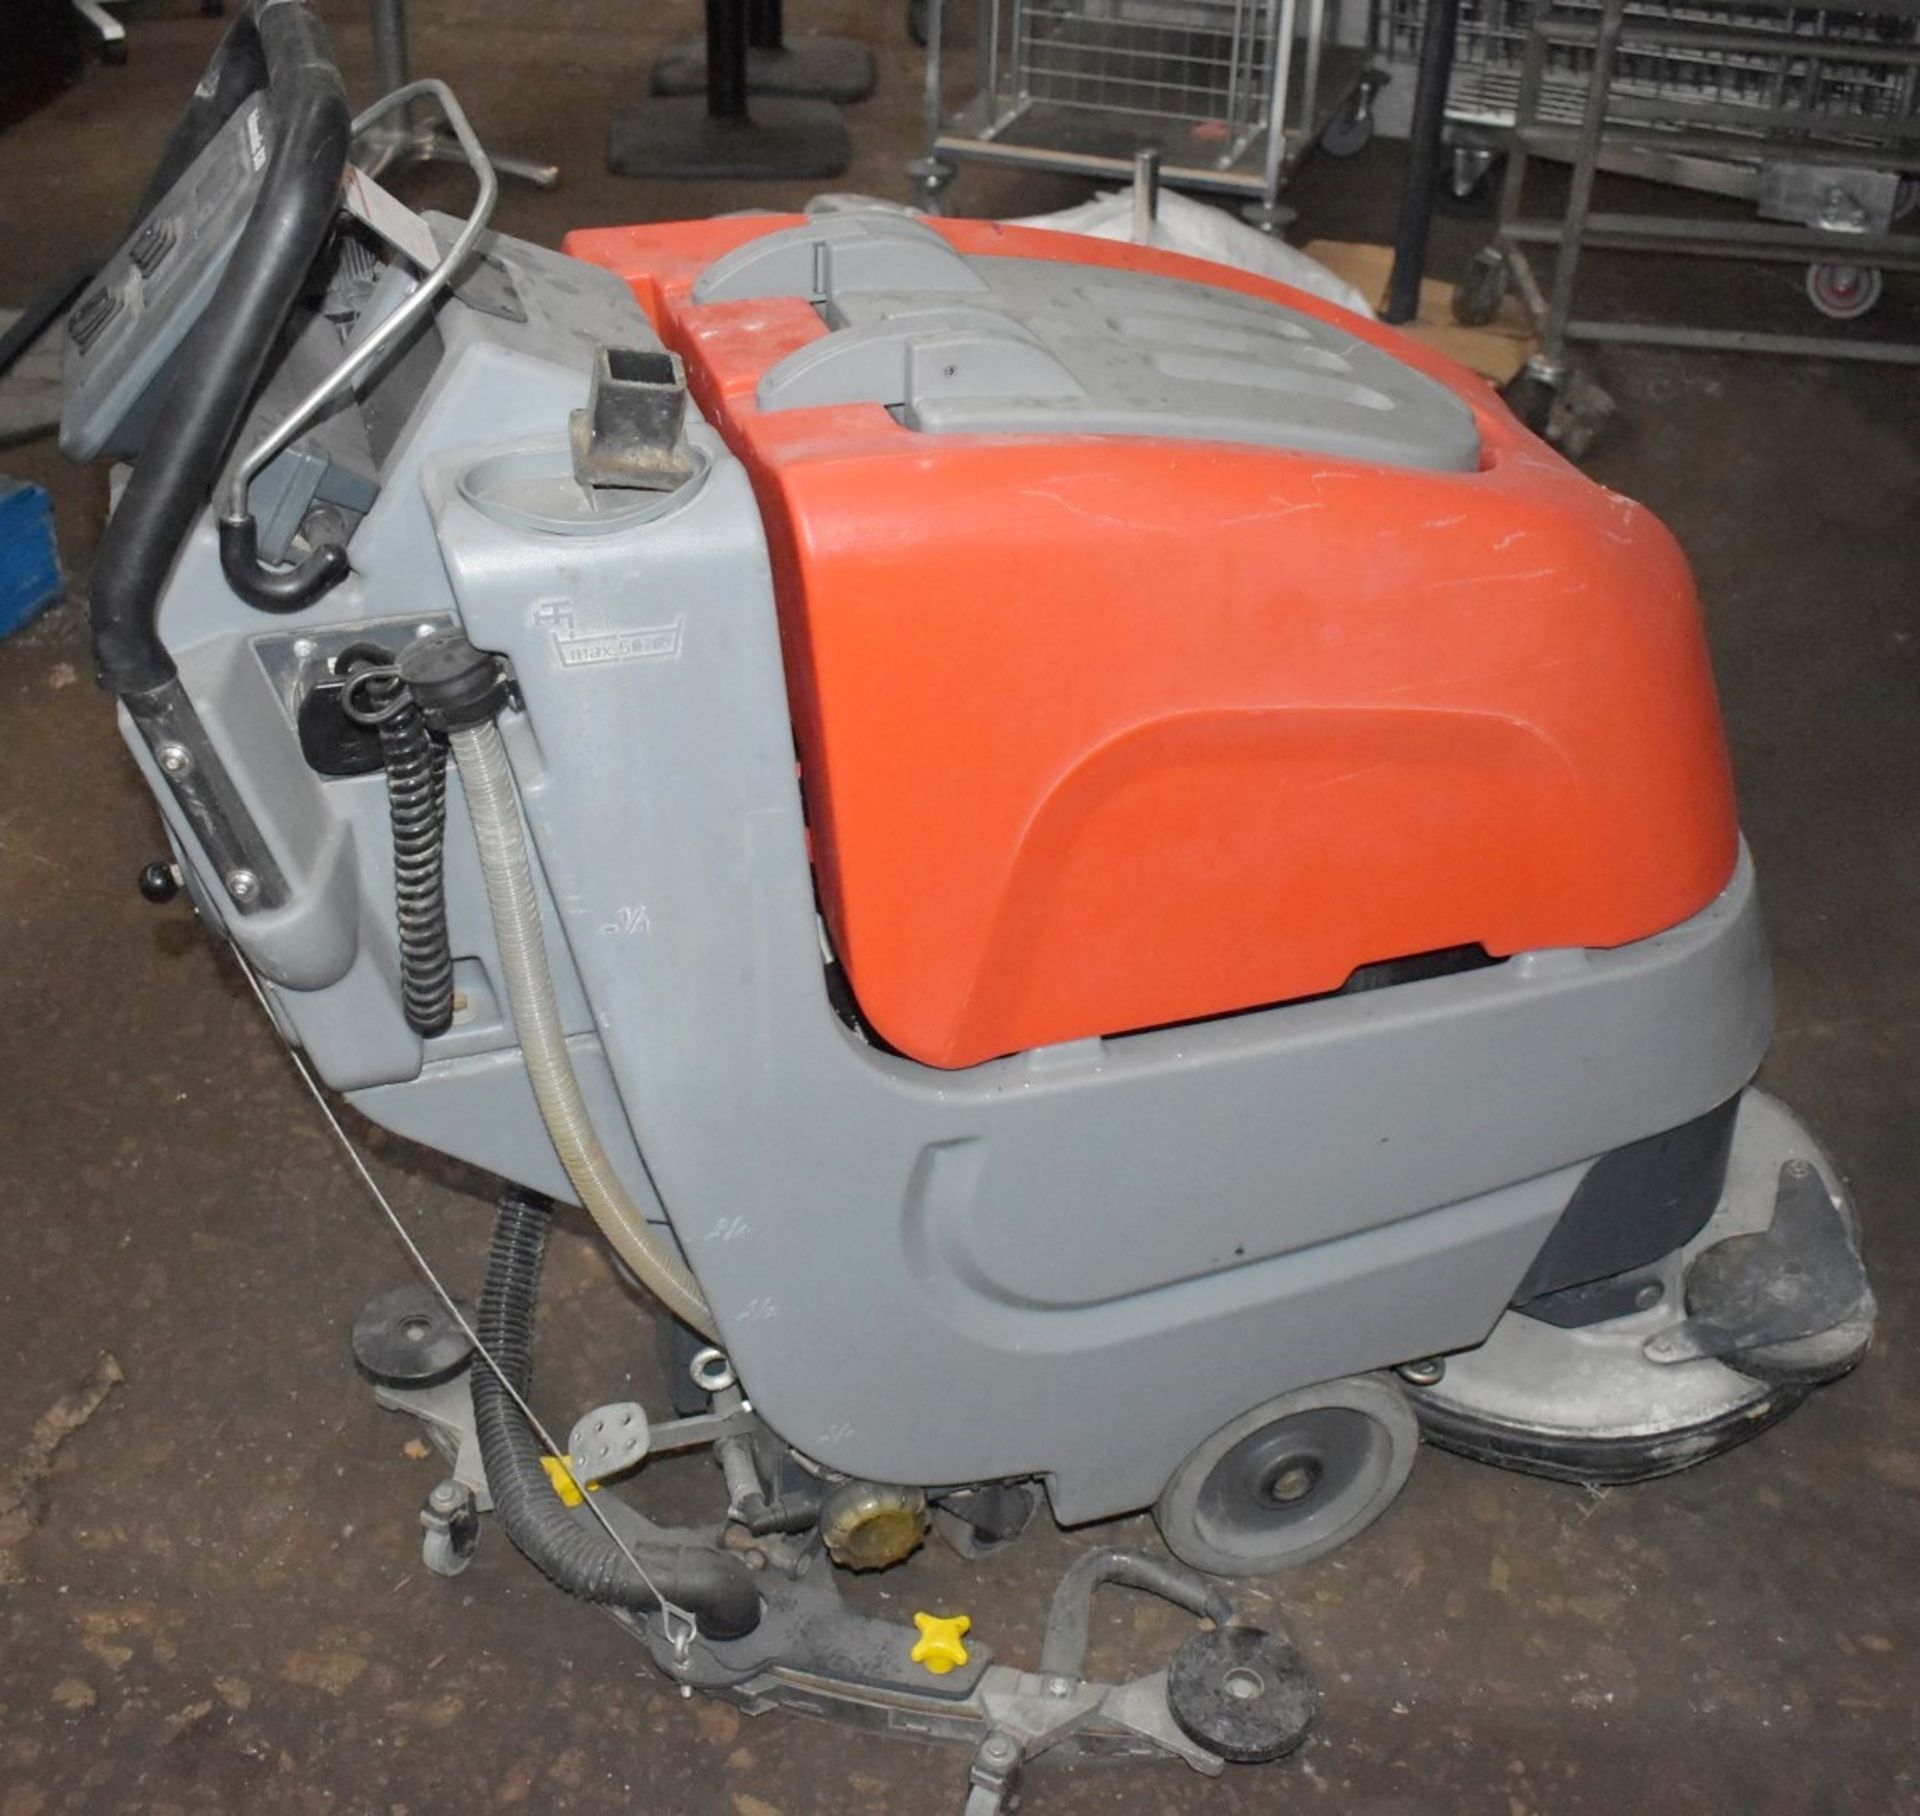 1 x Hako Scrubmaster B30 Commercial Floor Cleaner - Recently Removed From a Supermarket - Image 2 of 9